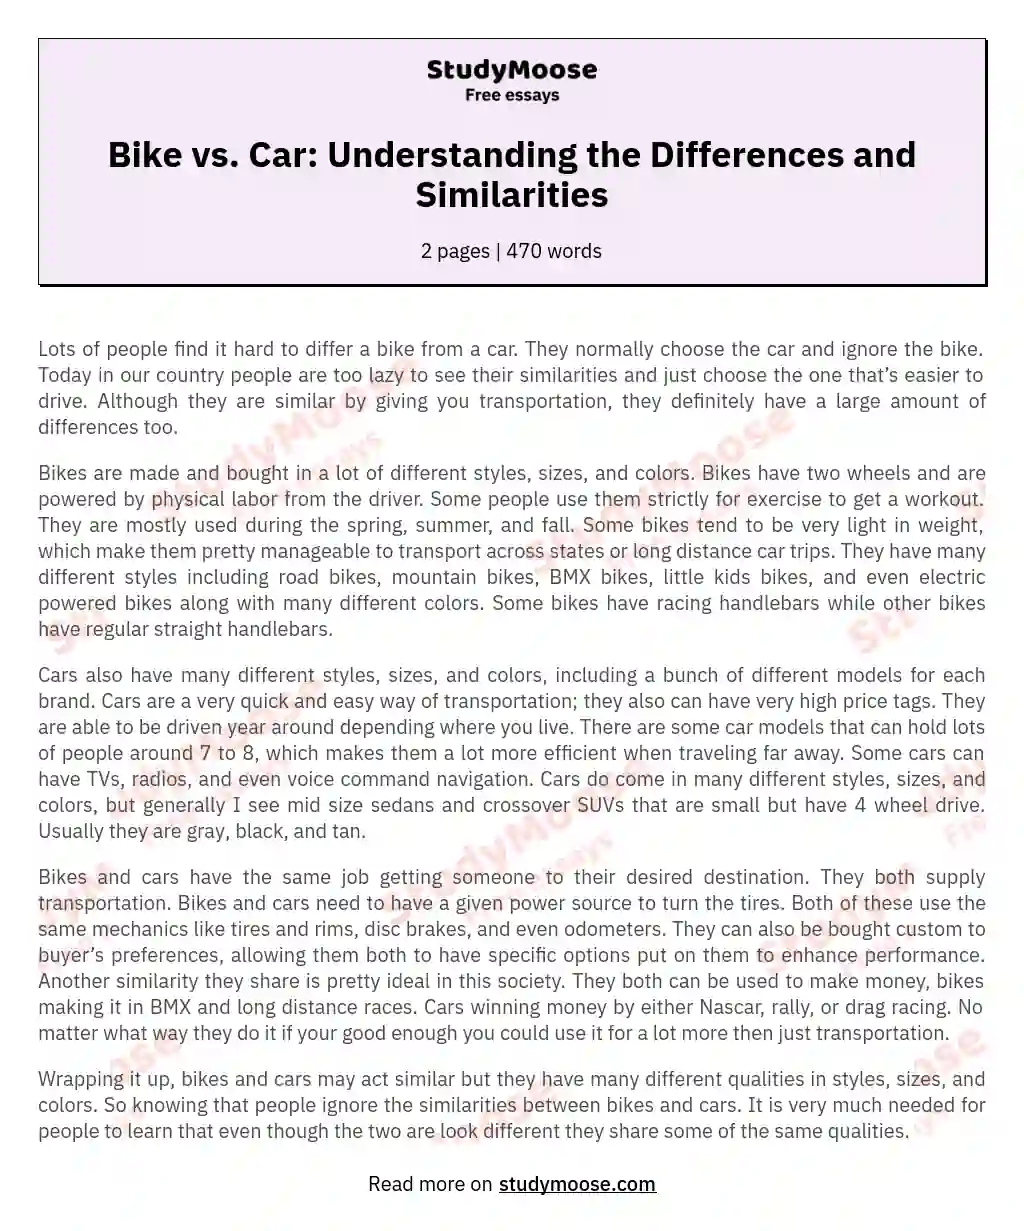 Bike vs. Car: Understanding the Differences and Similarities essay